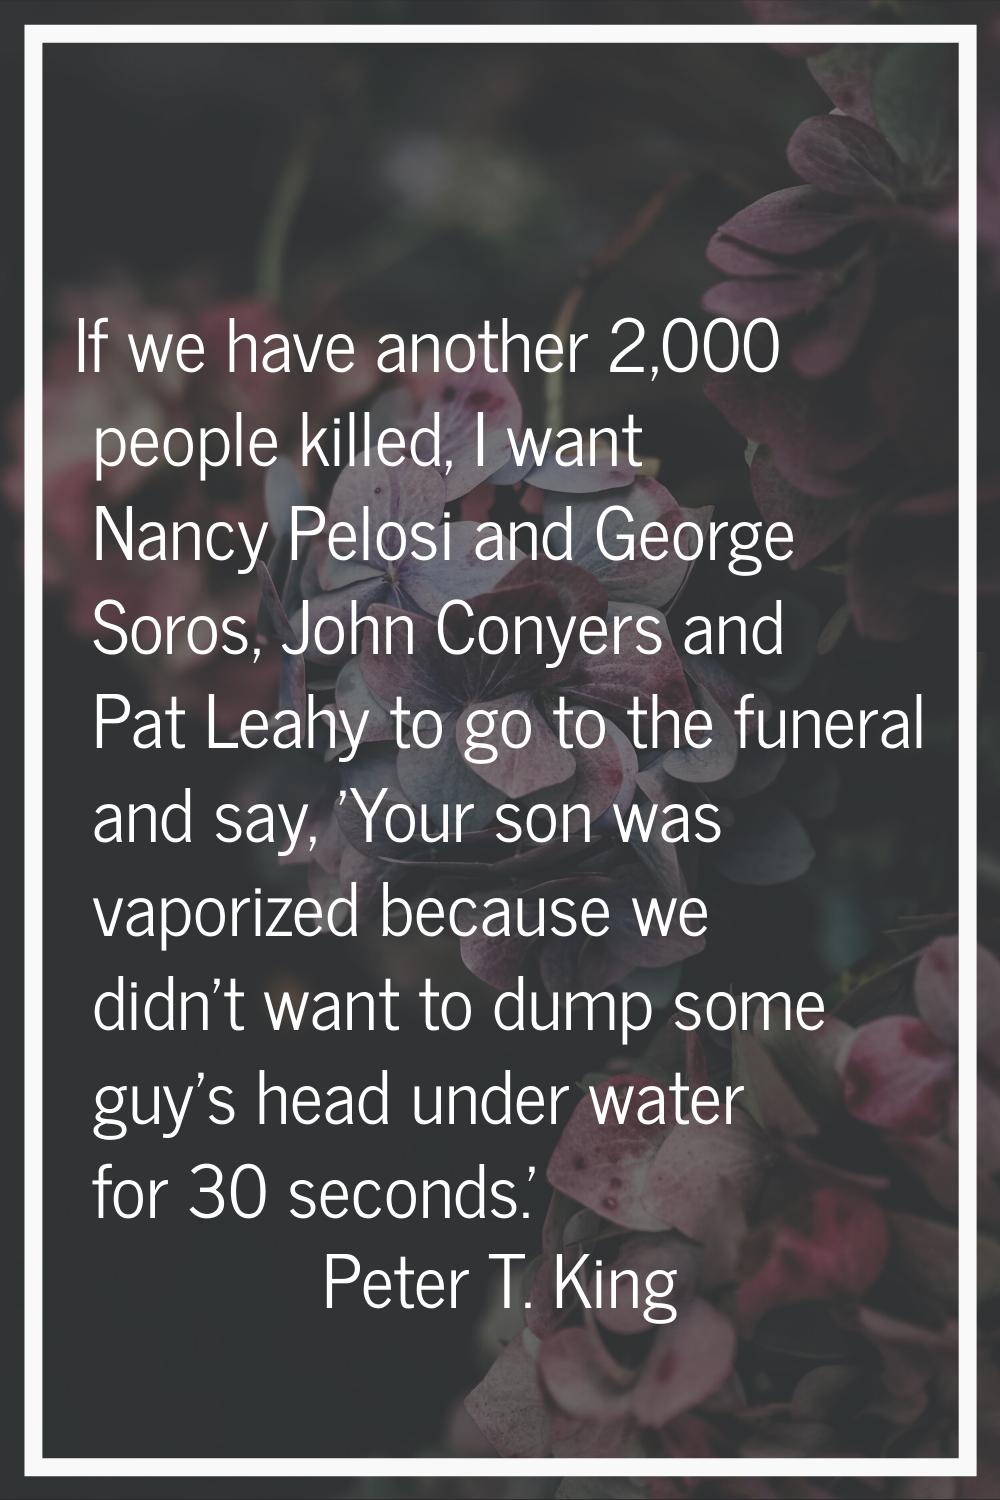 If we have another 2,000 people killed, I want Nancy Pelosi and George Soros, John Conyers and Pat 